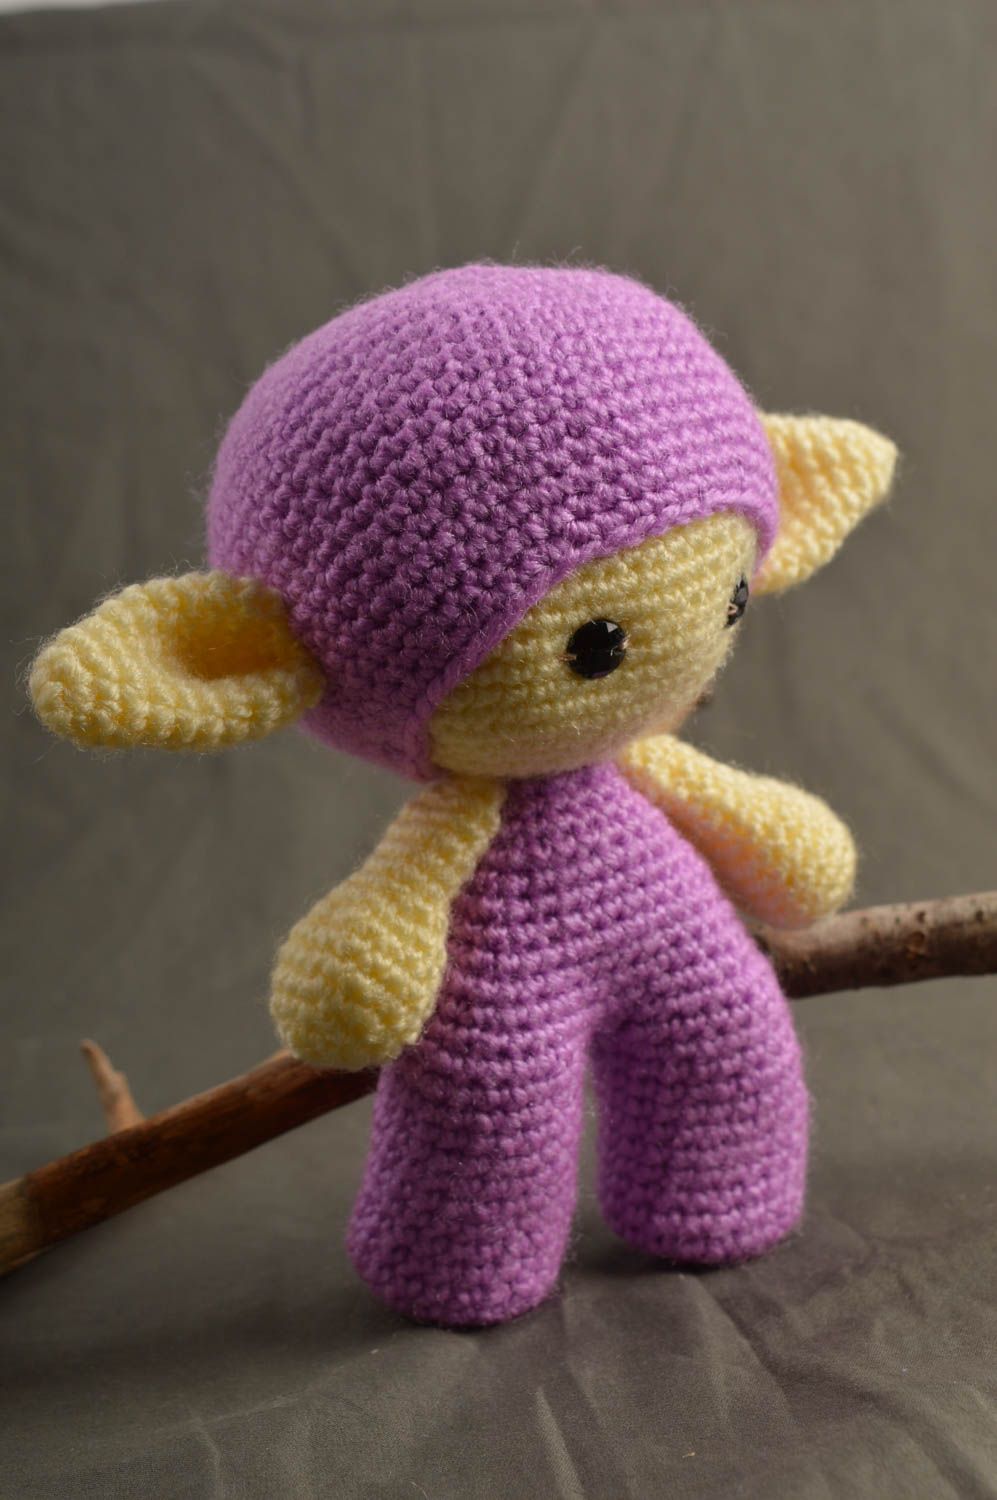 Handmade soft toy crocheted toy design soft toy fabric toy decorative soft toy photo 1